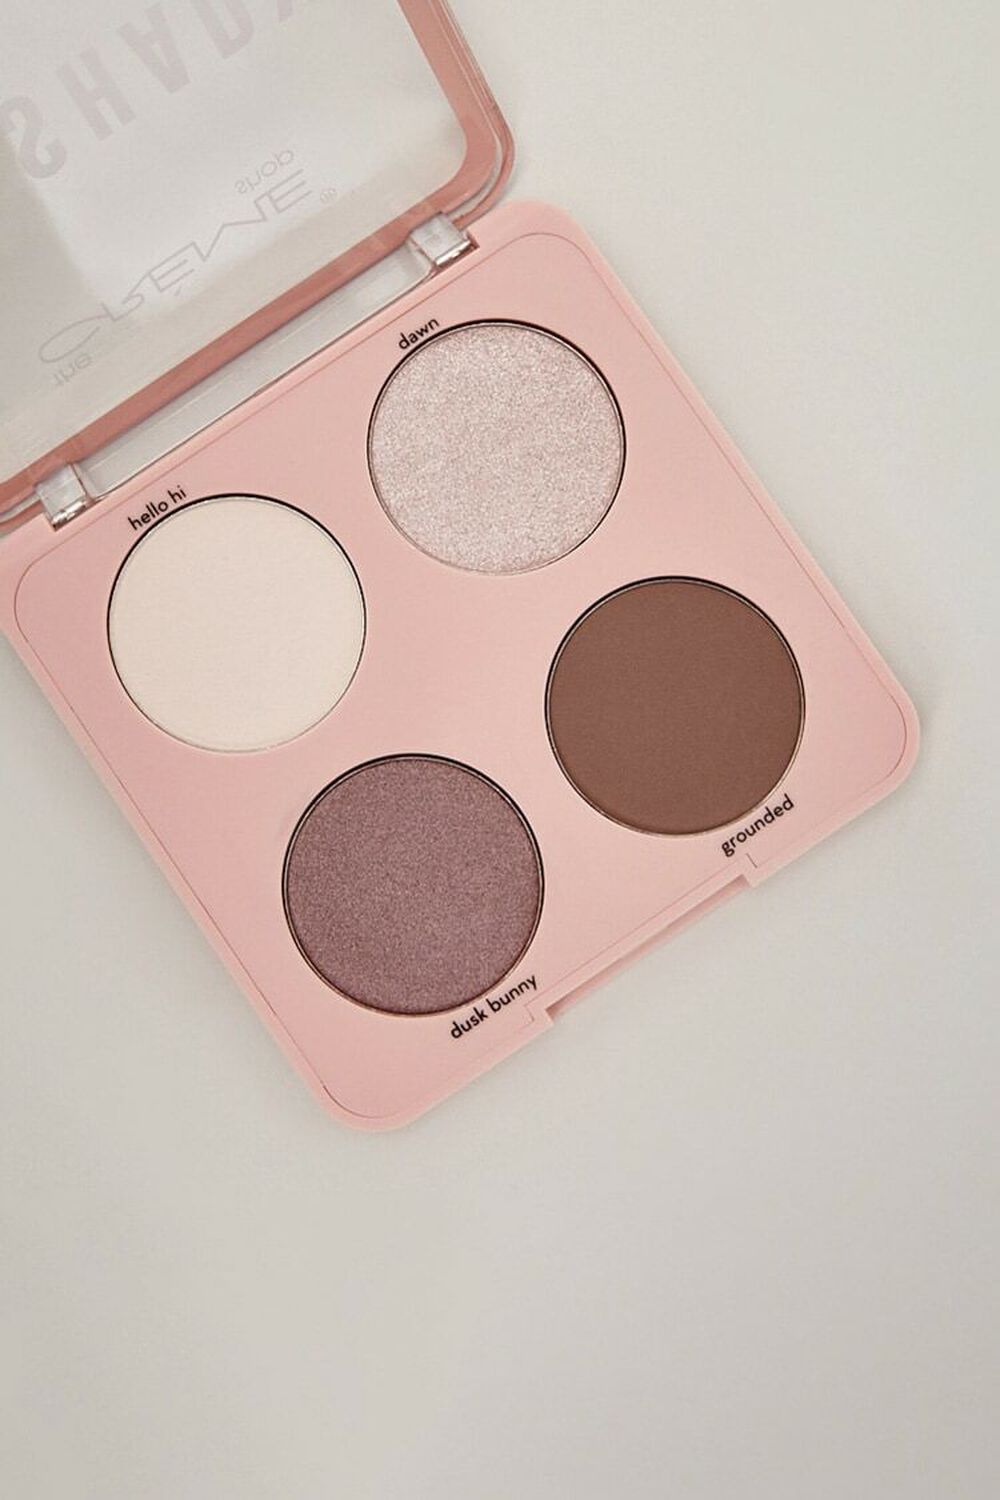 ALL DAY EVERY DAY The Crème Shop So Shady Eye Shadow Palette, image 1